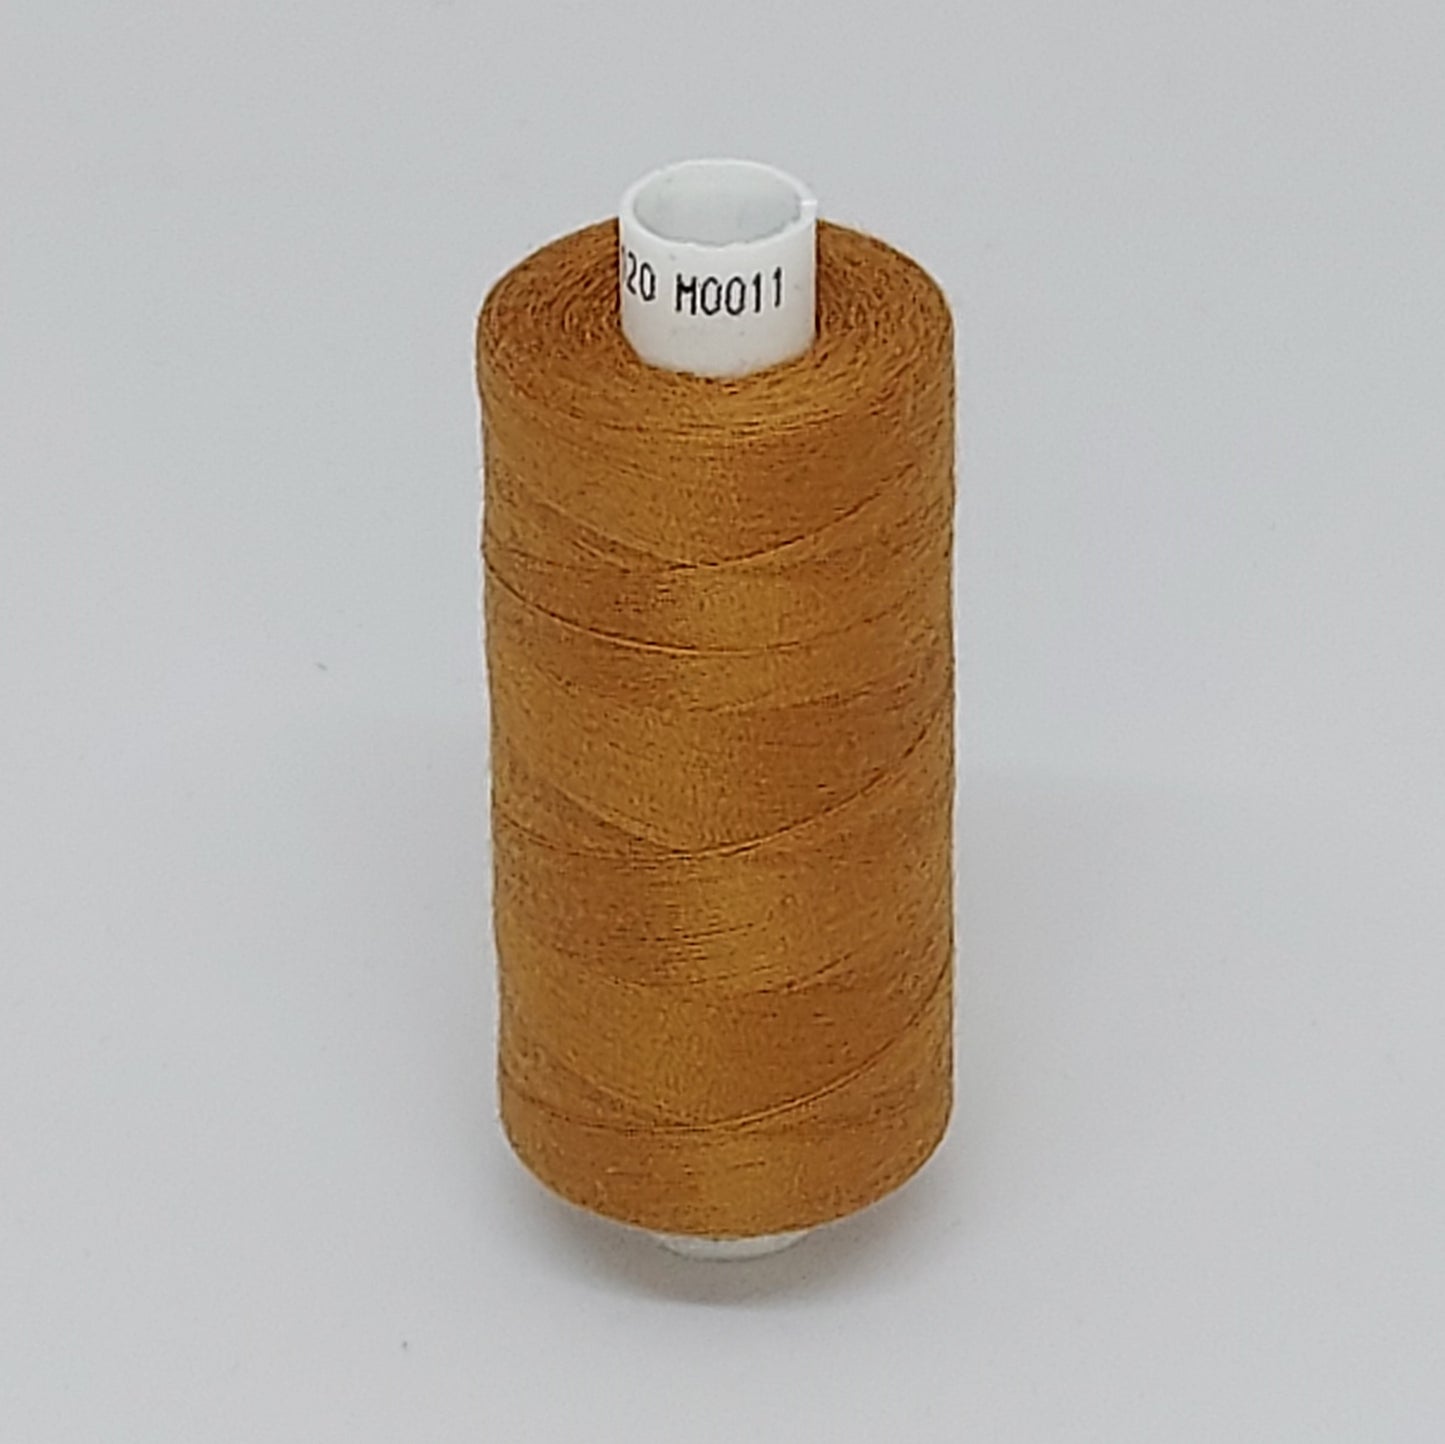 M0001 to M0103 Coats Moon 100% Polyester Thread Reels TKT 120 1000yd/914m